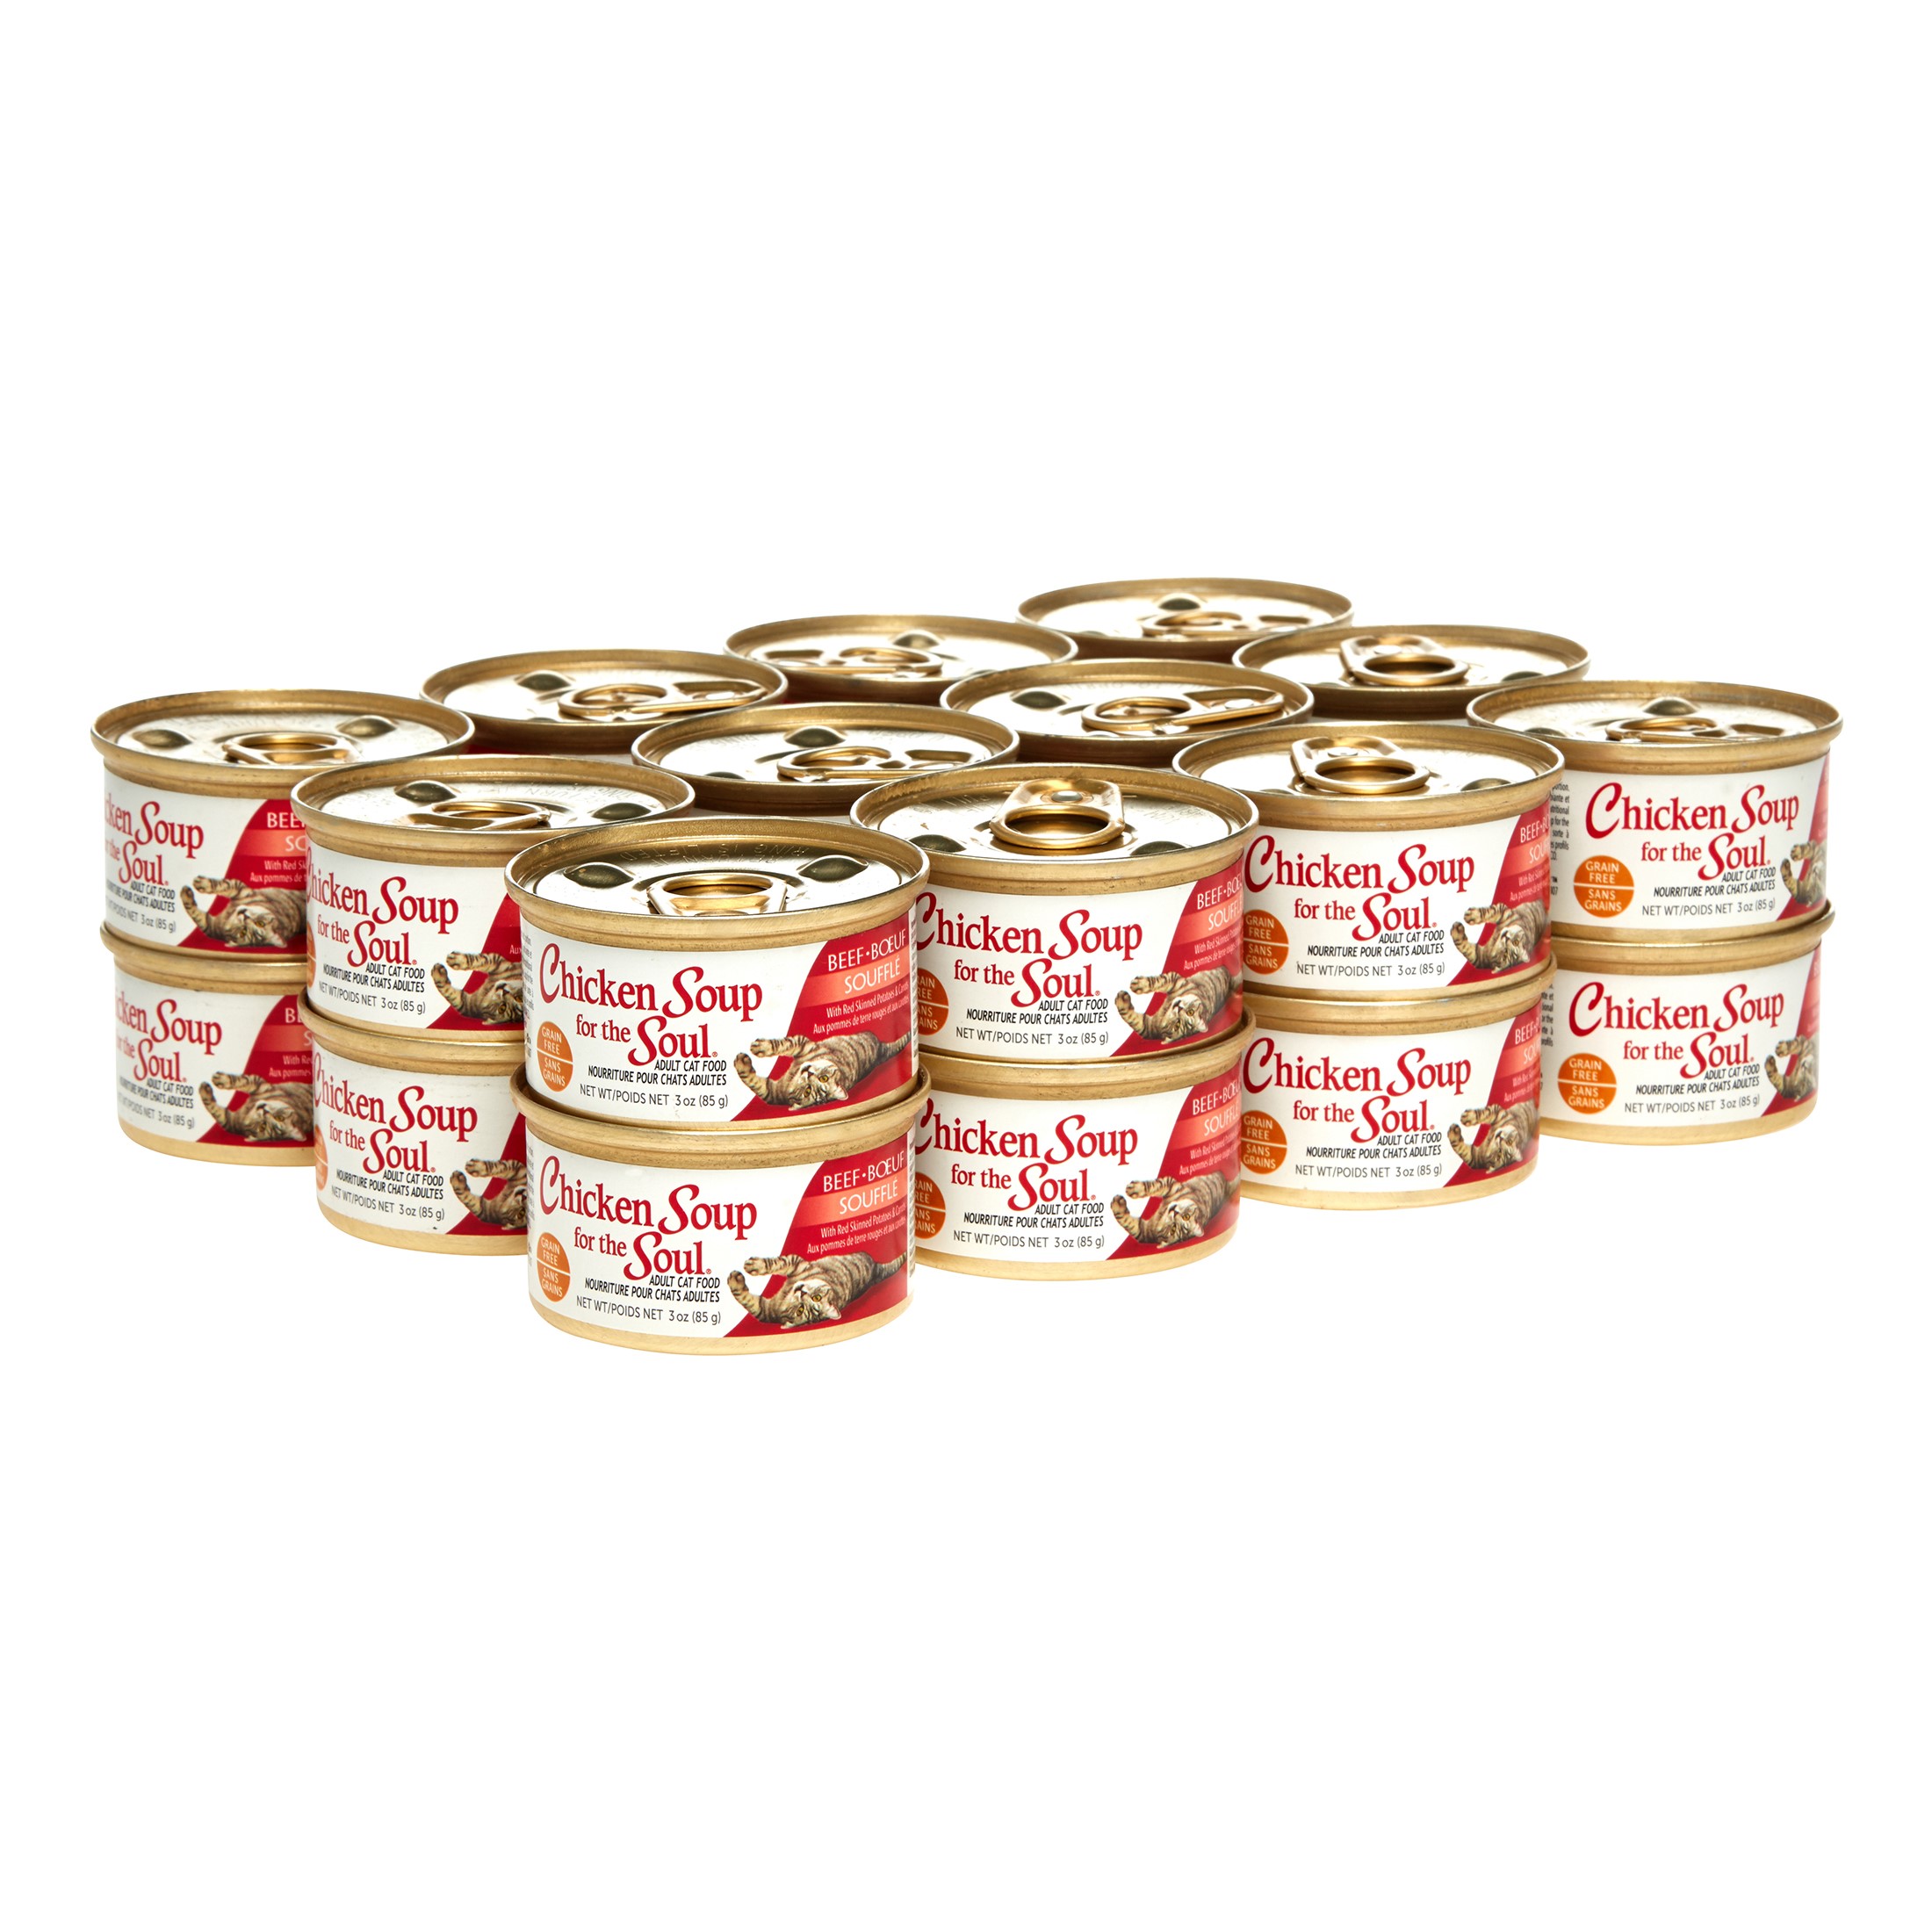 (24 Pack) Chicken Soup For The Soul Grain-Free Wet Cat Food, Beef Souffle, 3 oz - image 3 of 3